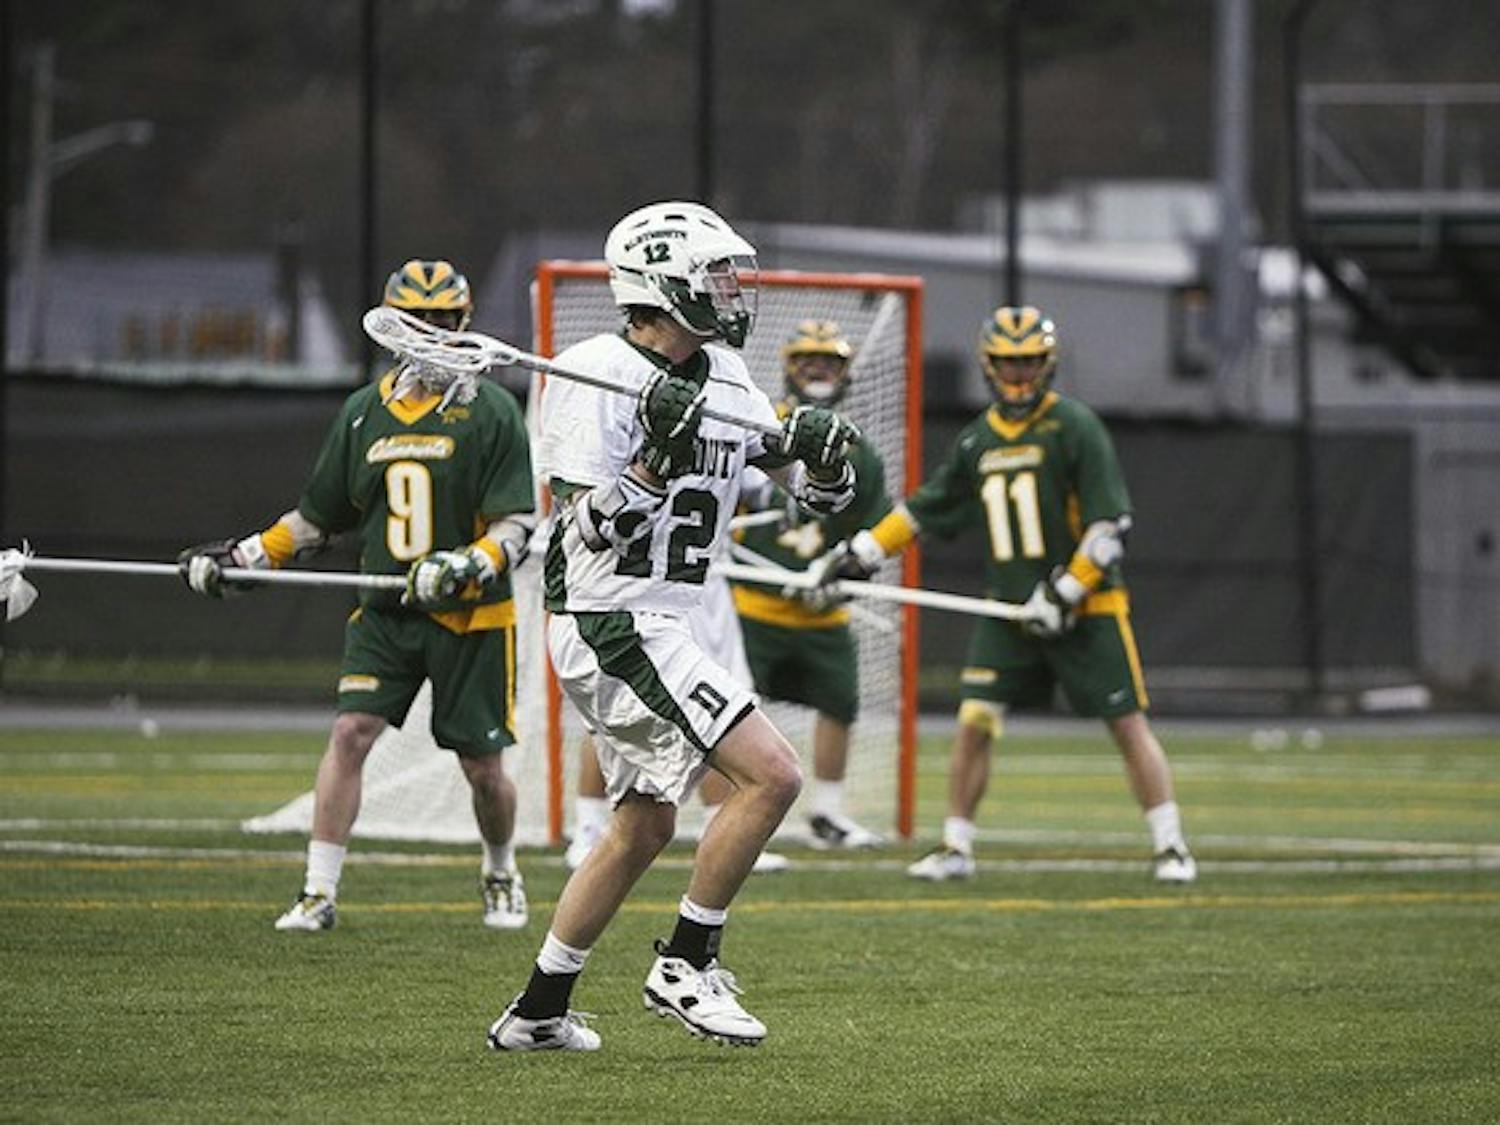 Defenseman Eric Clemmenson '14 had to leave the men's lacrosse game against Cornell on Saturday with a season-ending Achilles tendon tear.